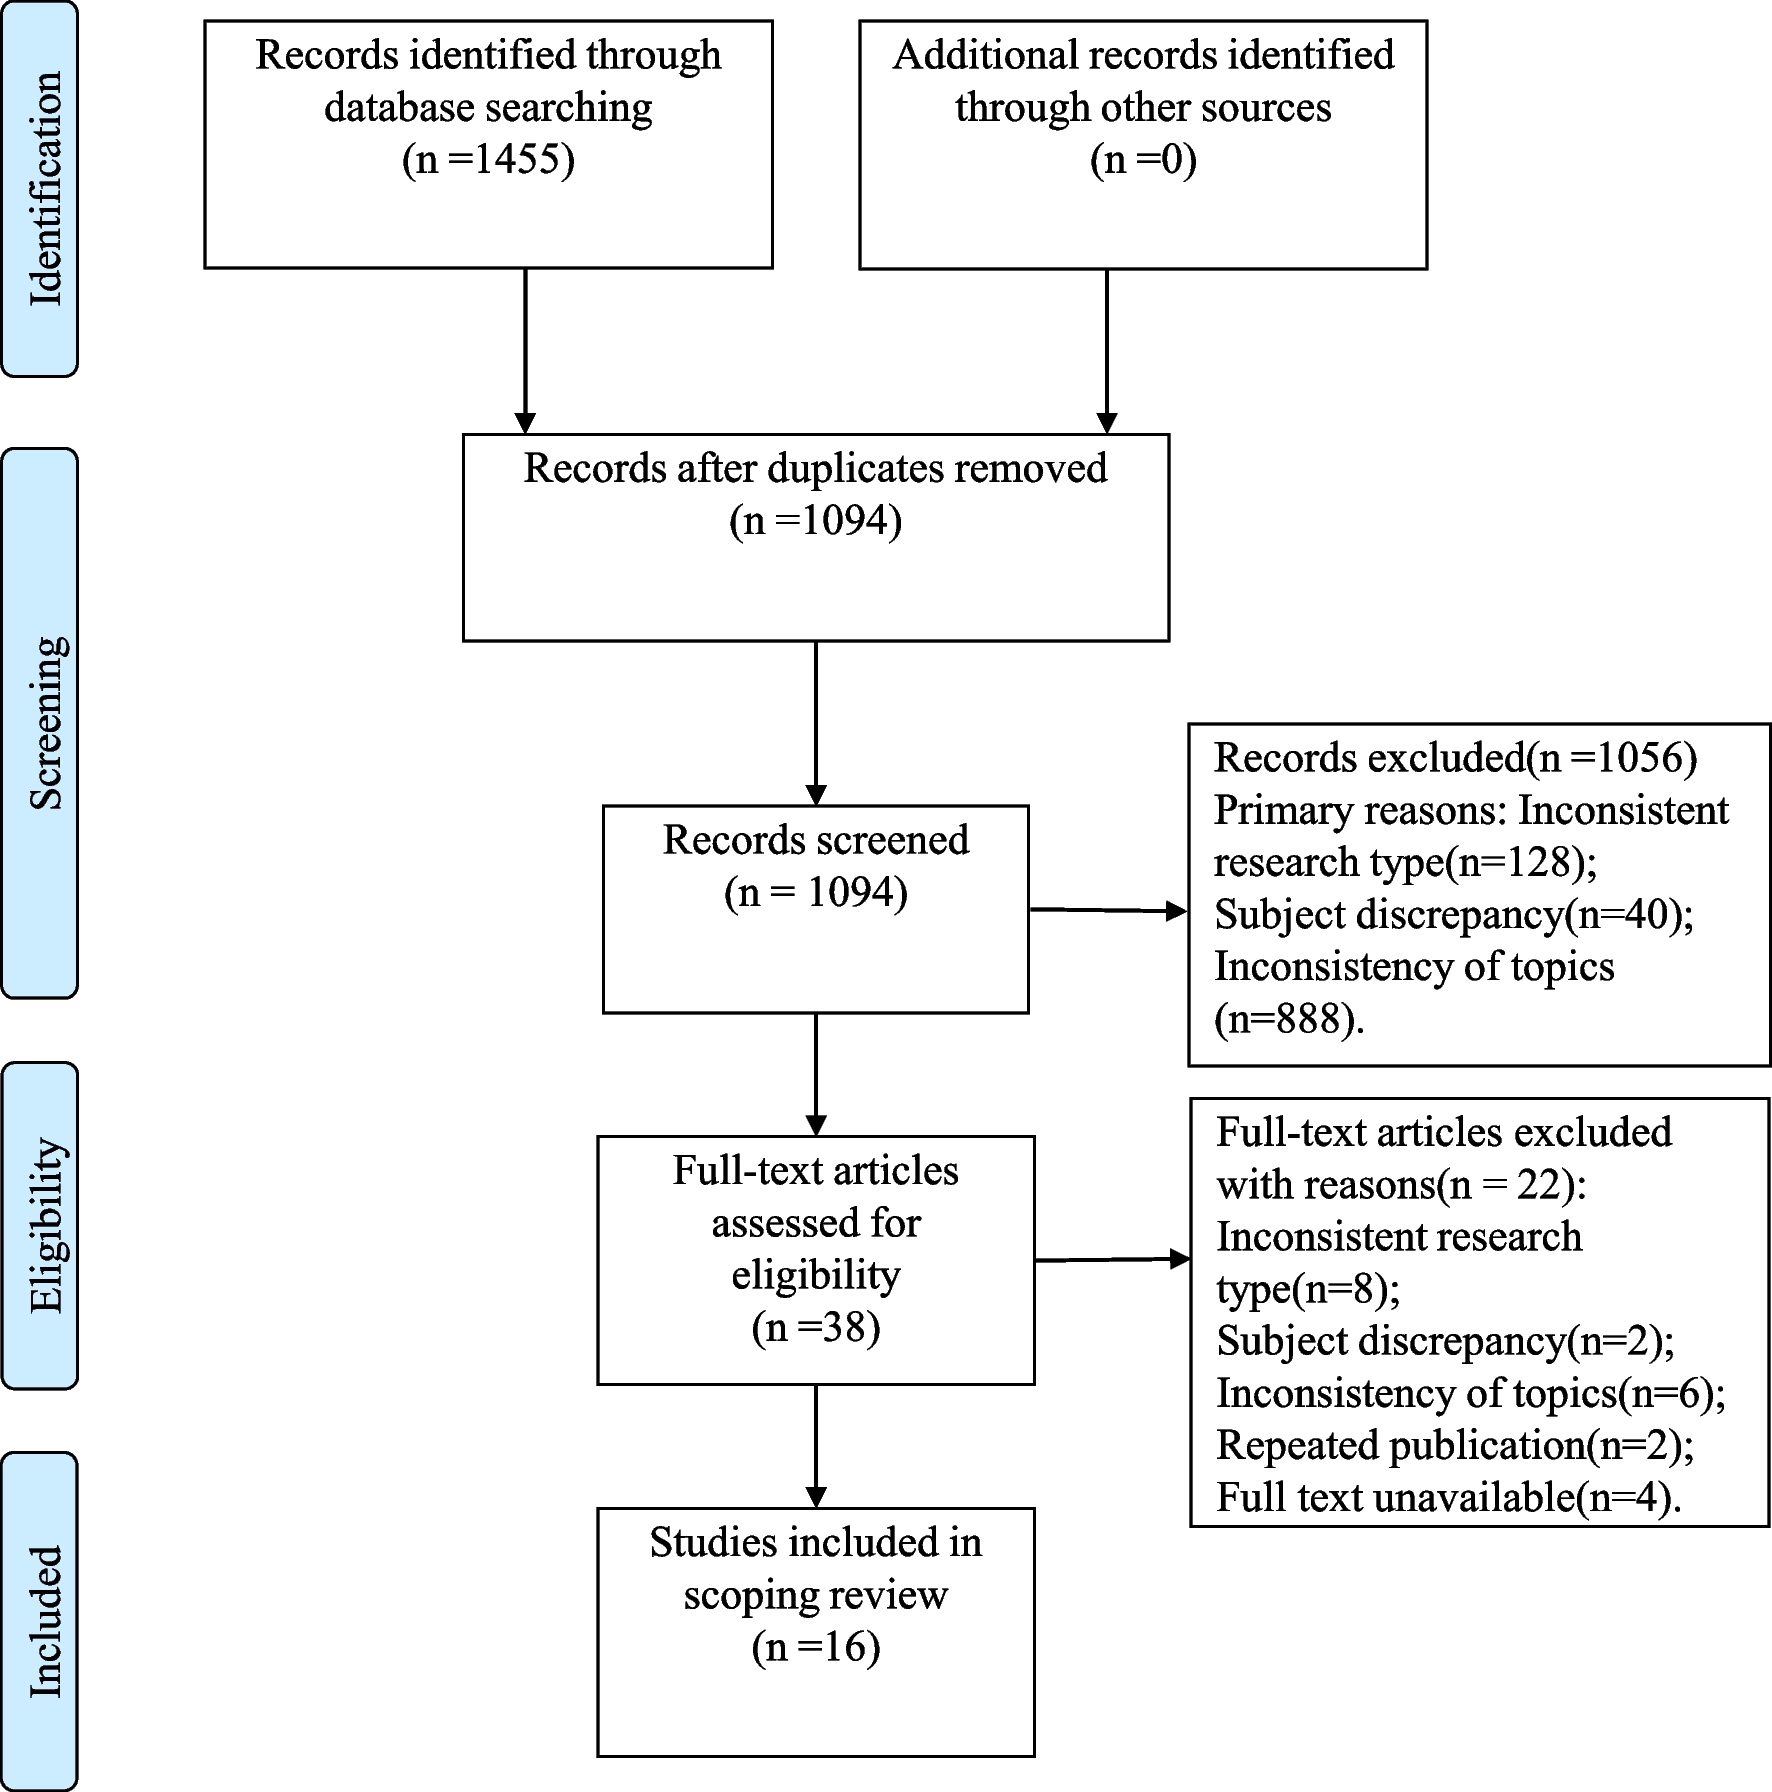 The Effectiveness and Safety of Intrapartum or Postpartum Catheterization in the Prevention of Postpartum Urinary Retention: A Scoping Review